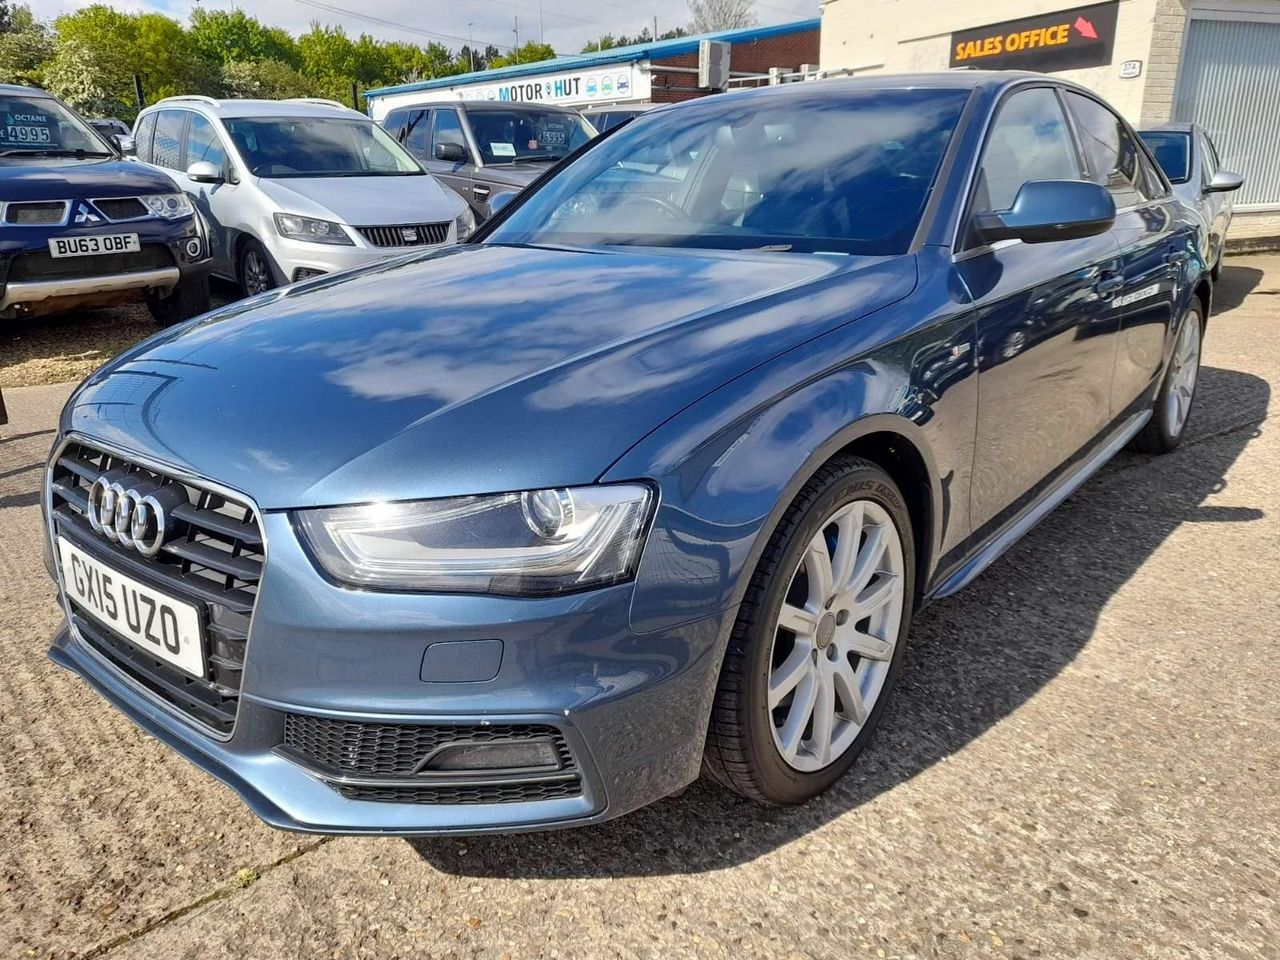 2015 Audi A4 3.0 TDI V6 S line S Tronic quattro Euro 5 (s/s) 4dr - Picture 4 of 47